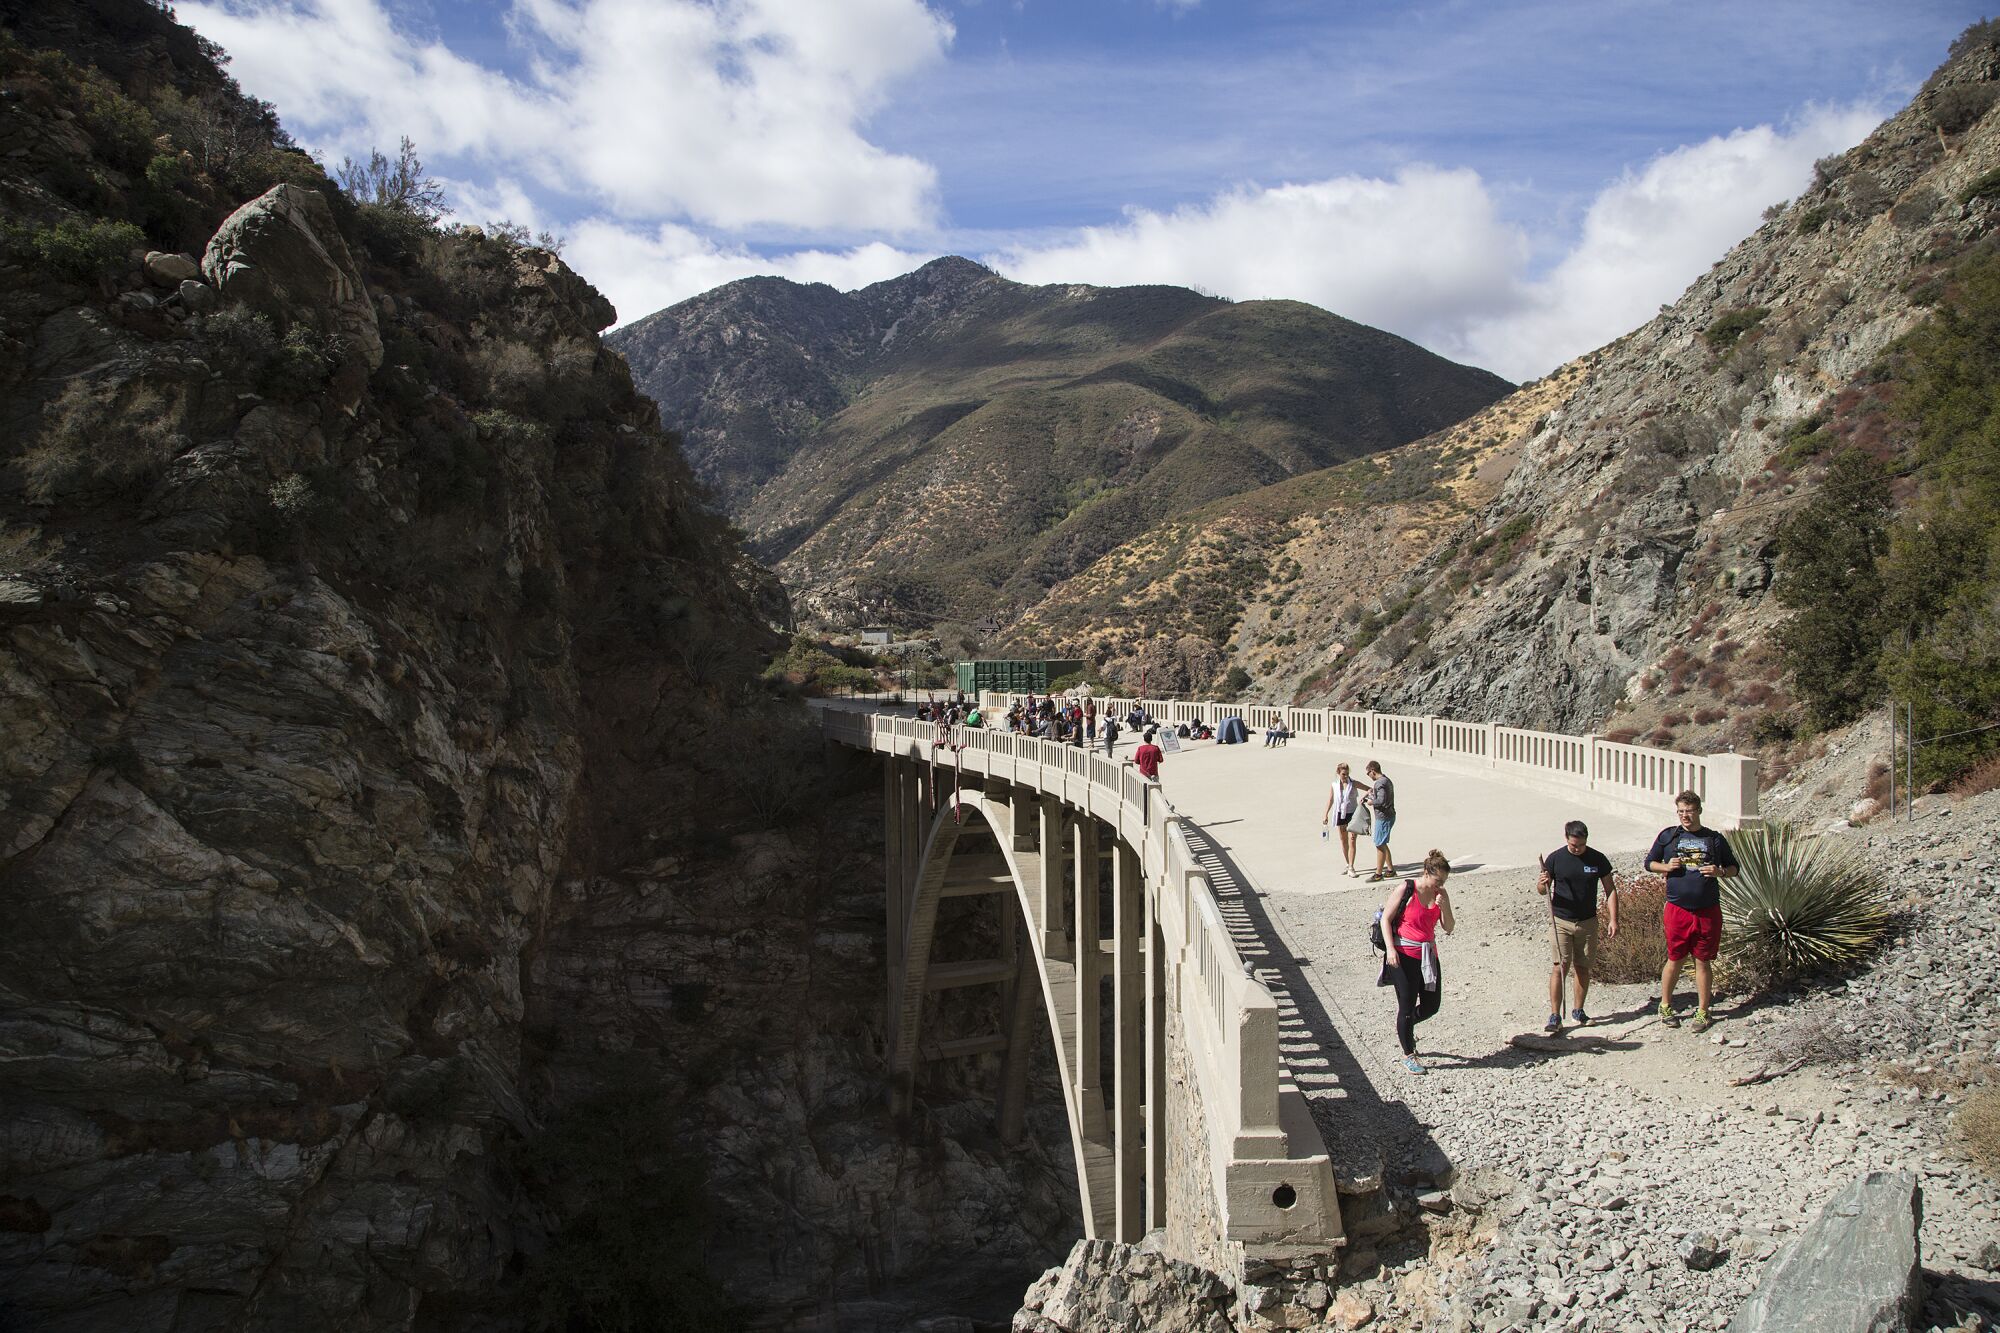 Hikers walk over the Bridge to Nowhere as bungee jumpers harness up in the background.